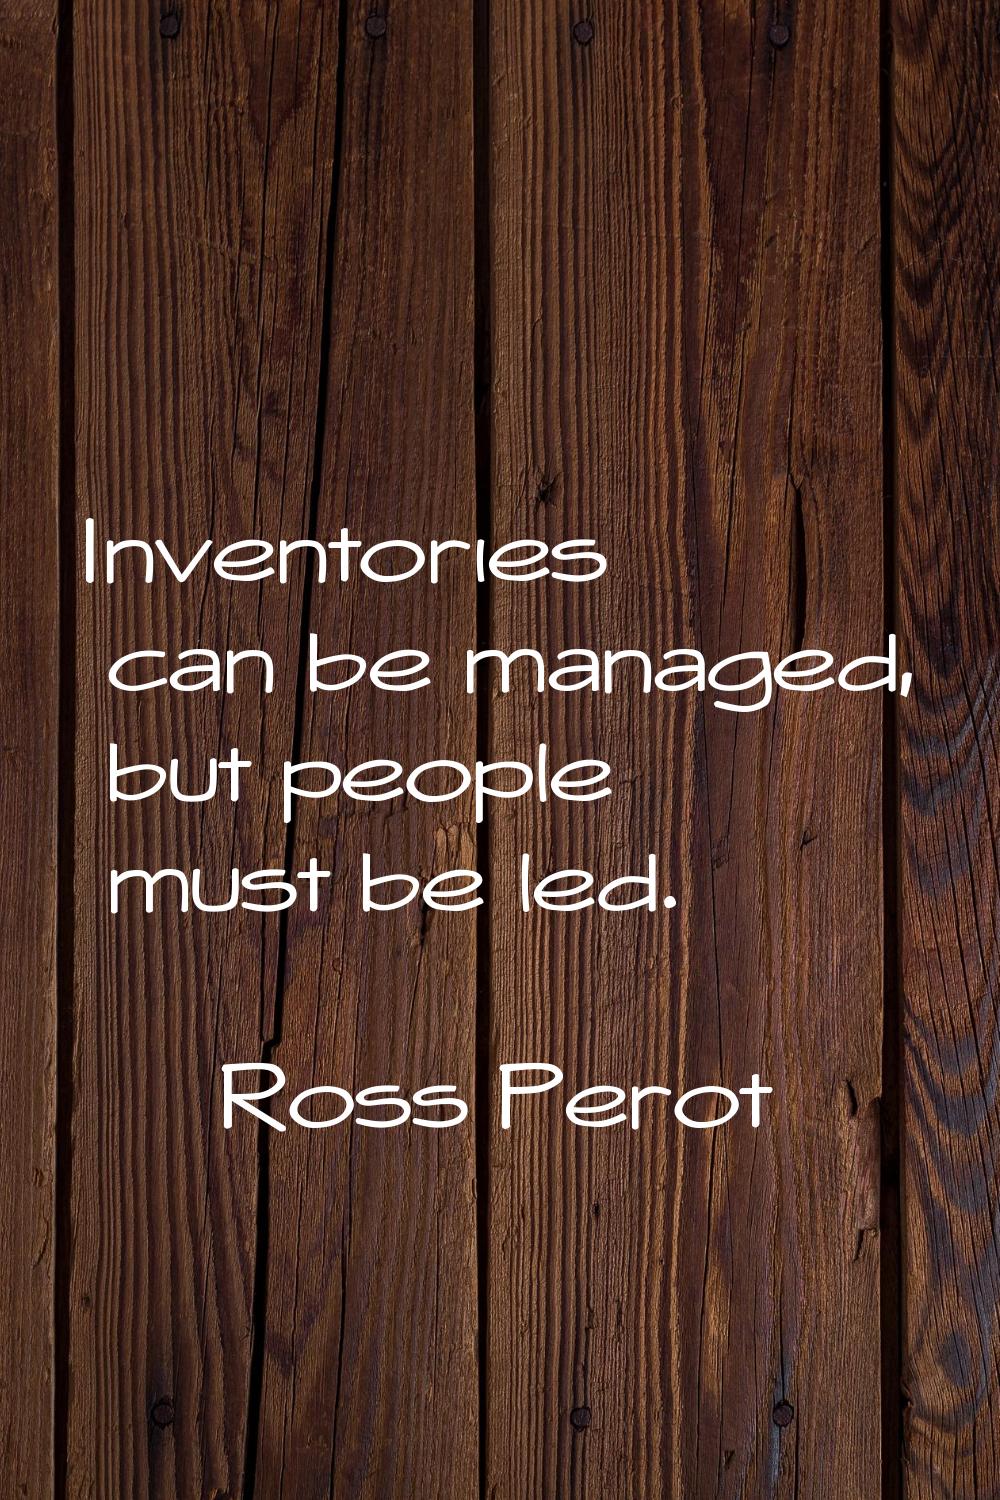 Inventories can be managed, but people must be led.